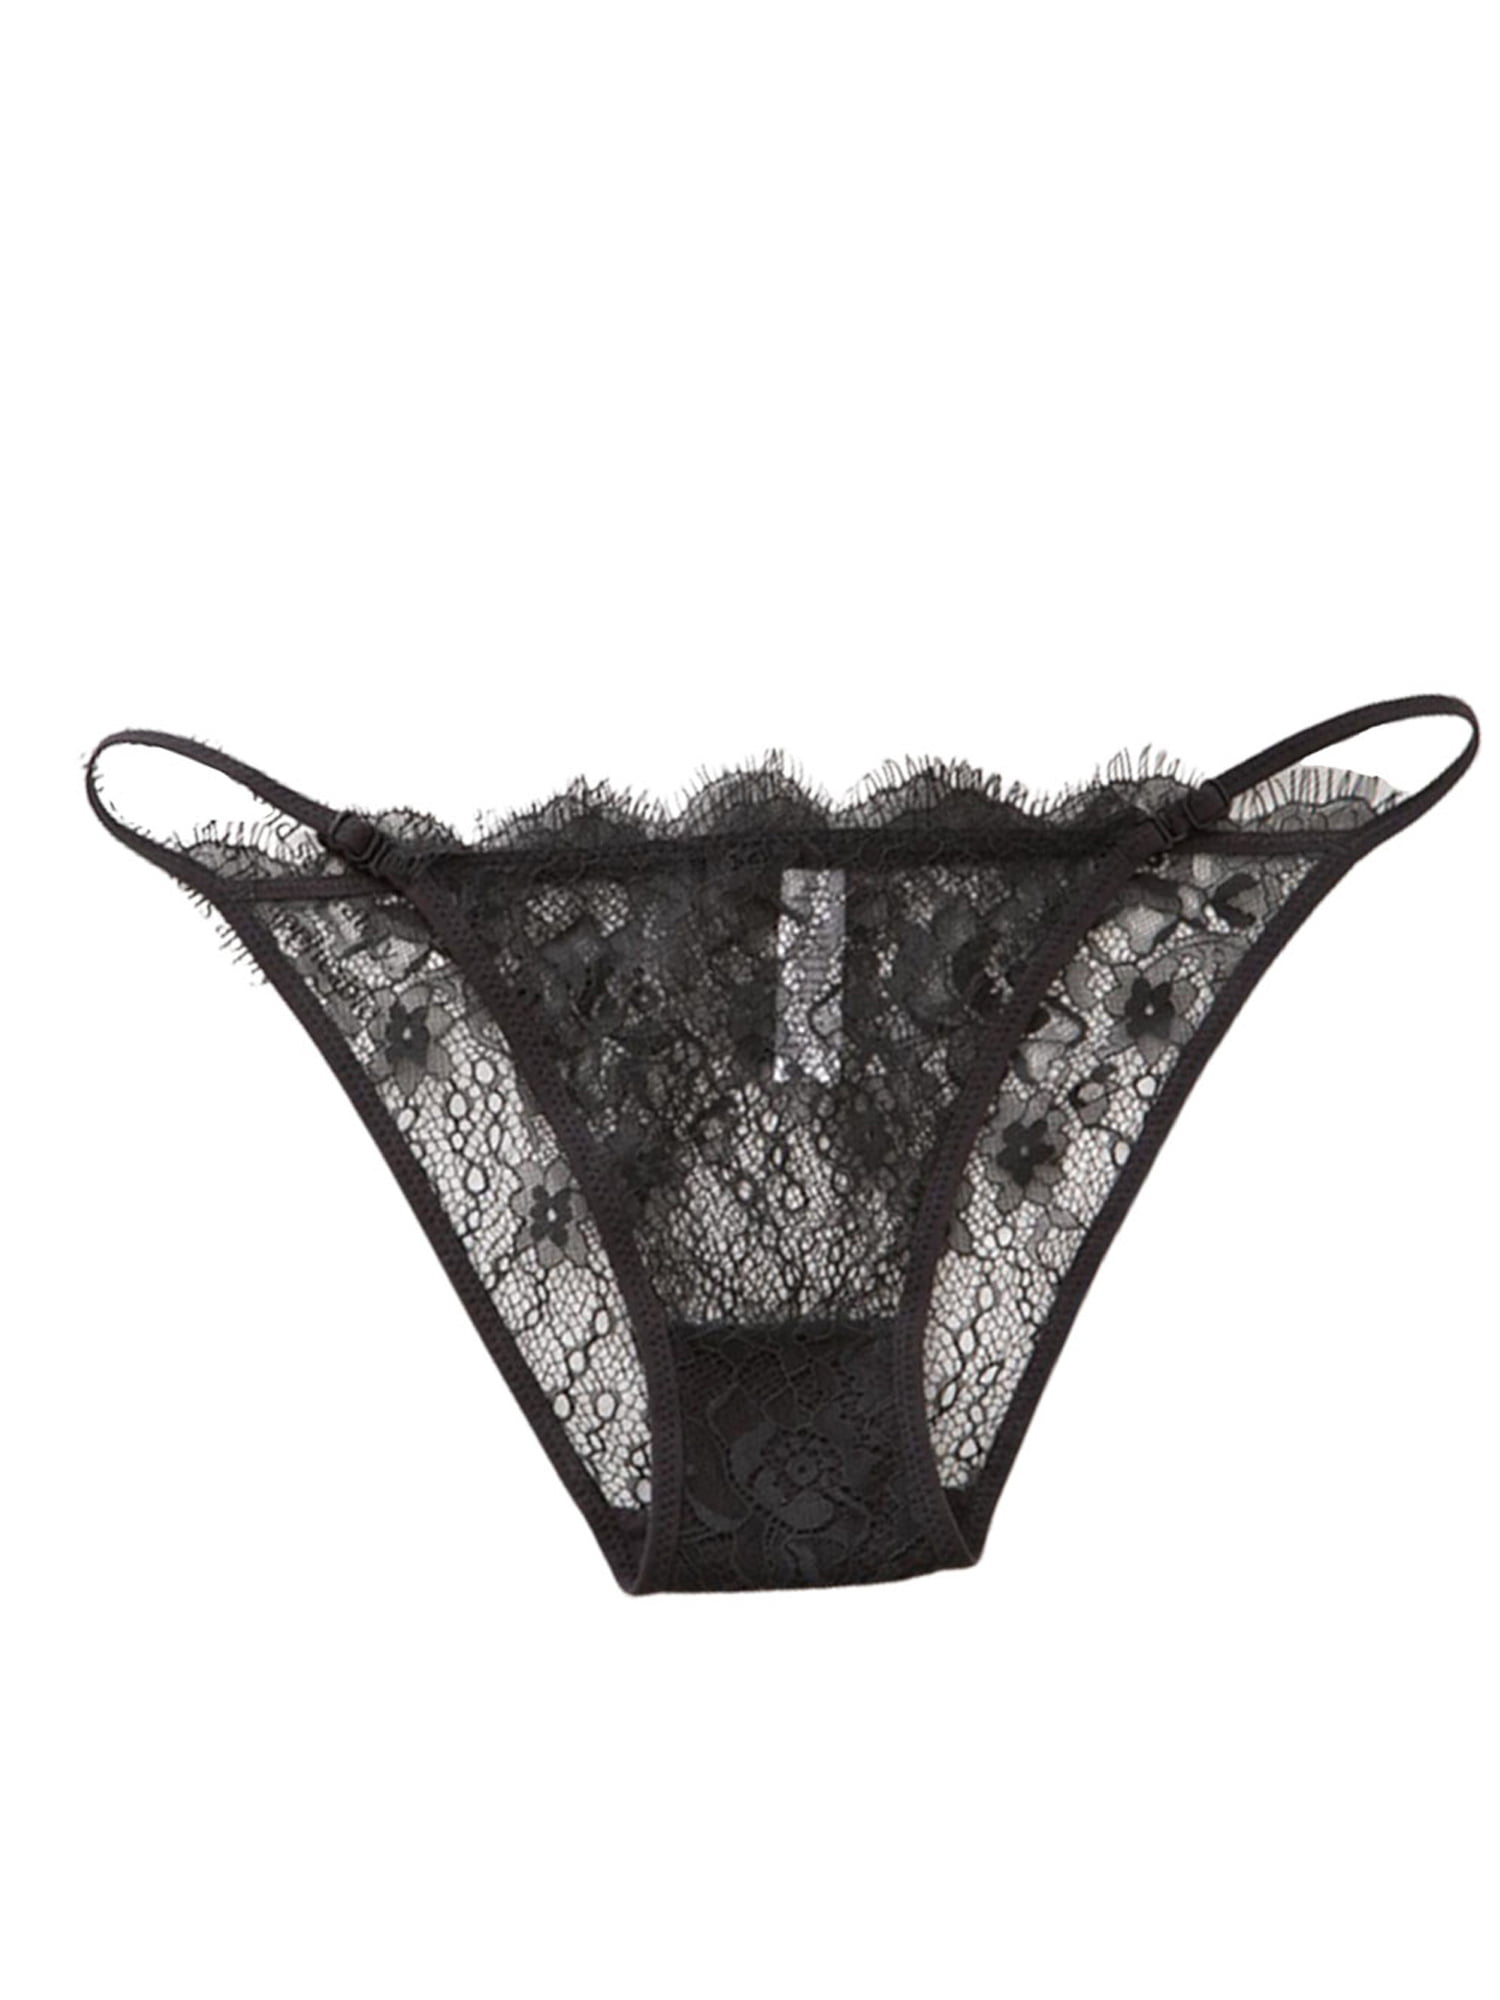 Details about   Briefs Panties Lace Thongs G-string Lingerie Knickers Fashion Women's Underwear 